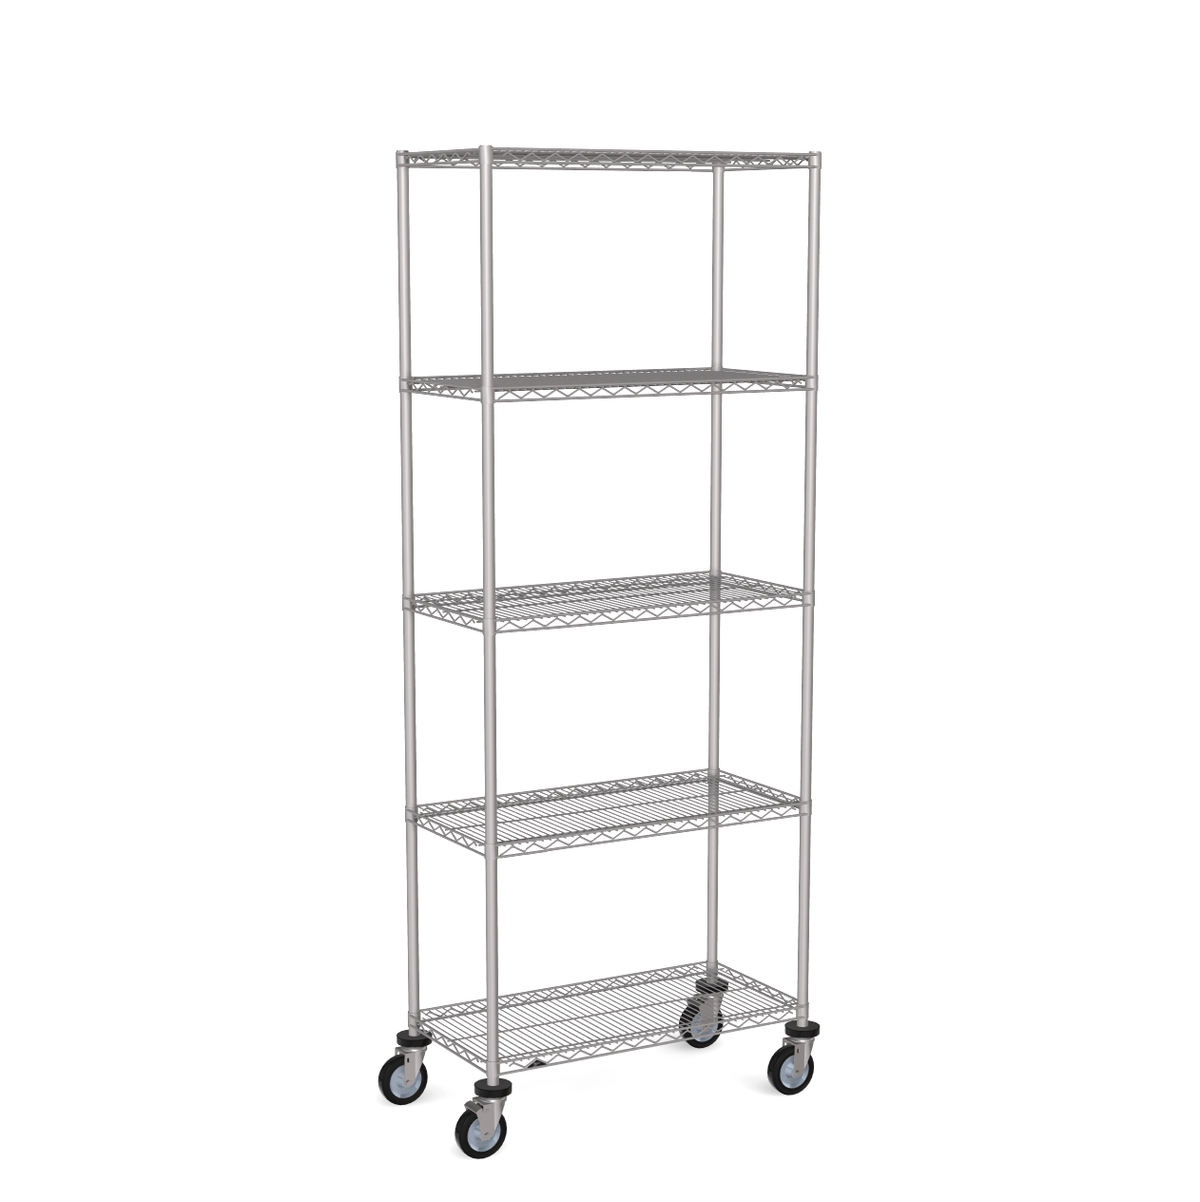 Stainless Steel Wire Shelving Units & Carts  | Wire-Shelves.com